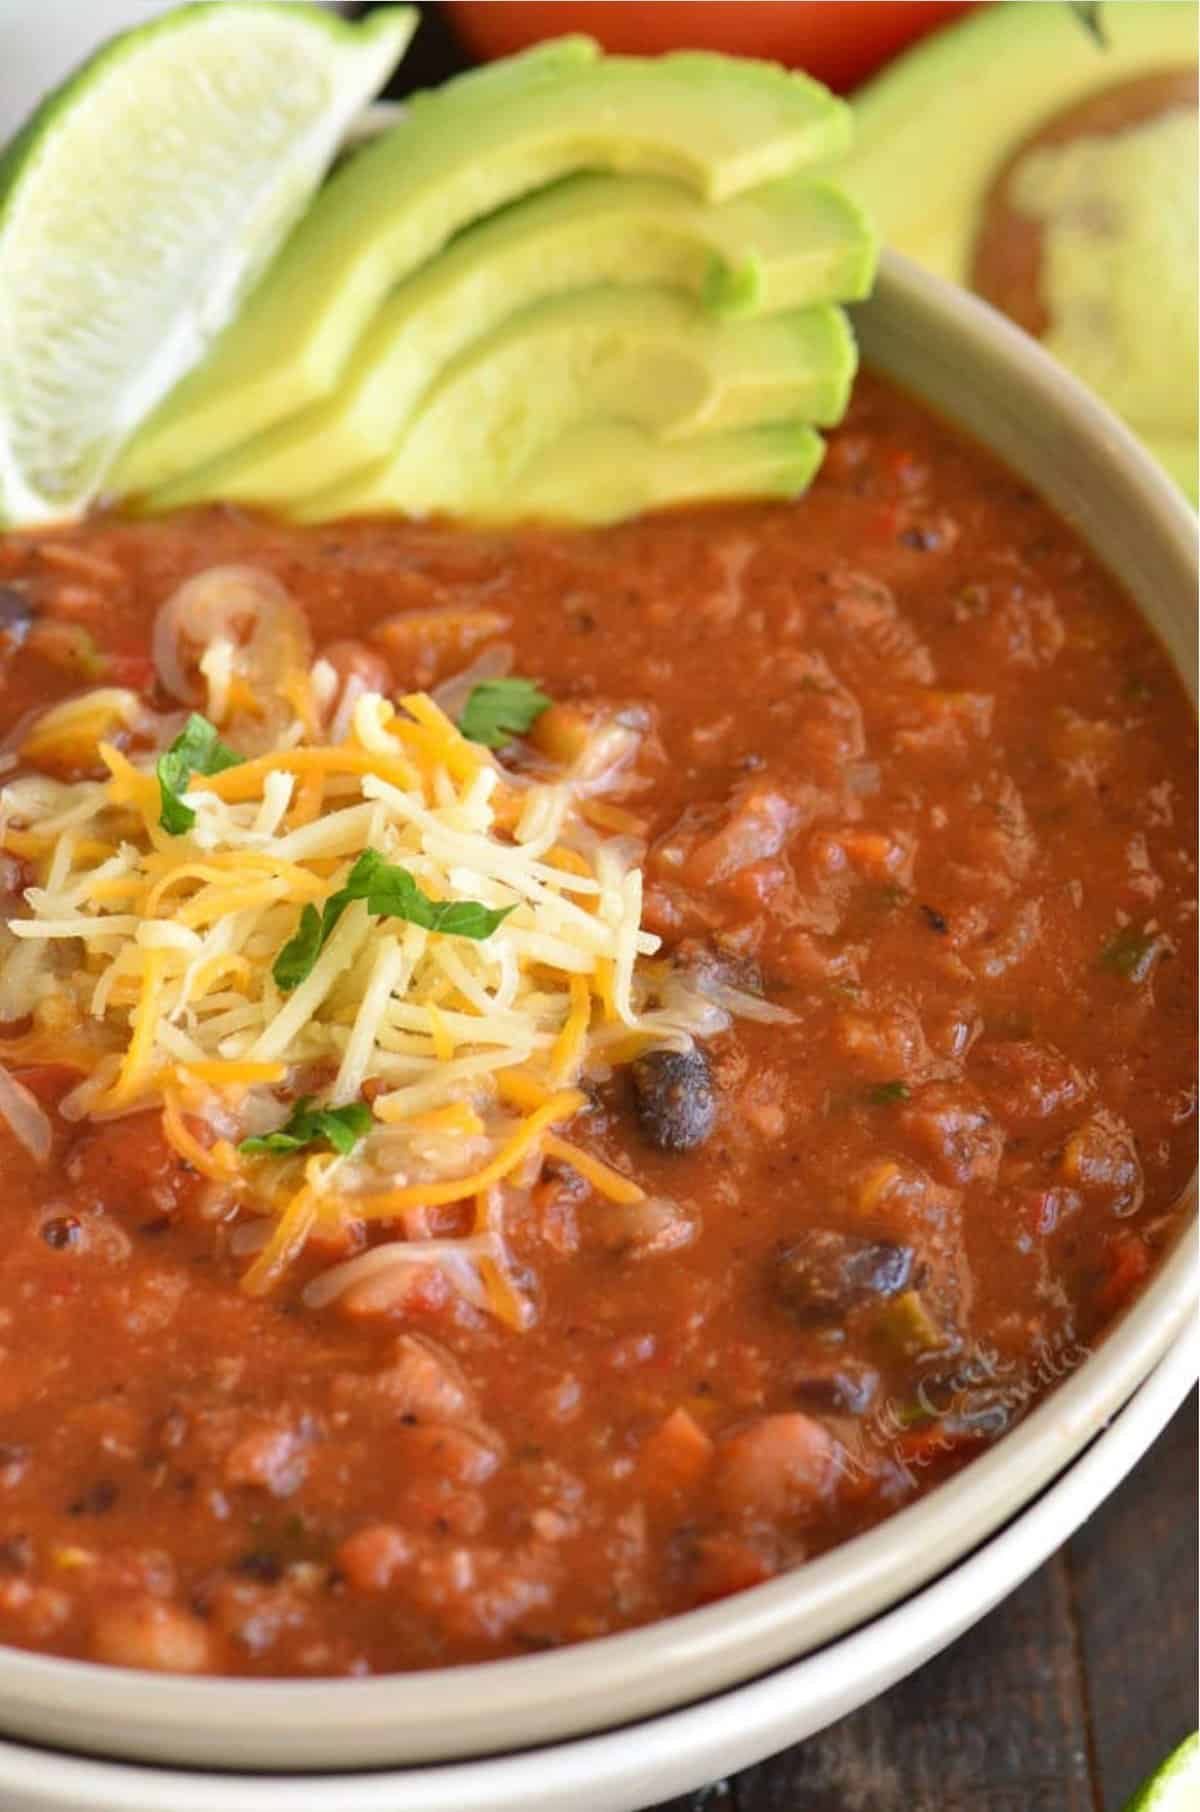 vegetarian chili in a bowl with a shredded cheese, a lime wedge, and sliced avocado for garnish.